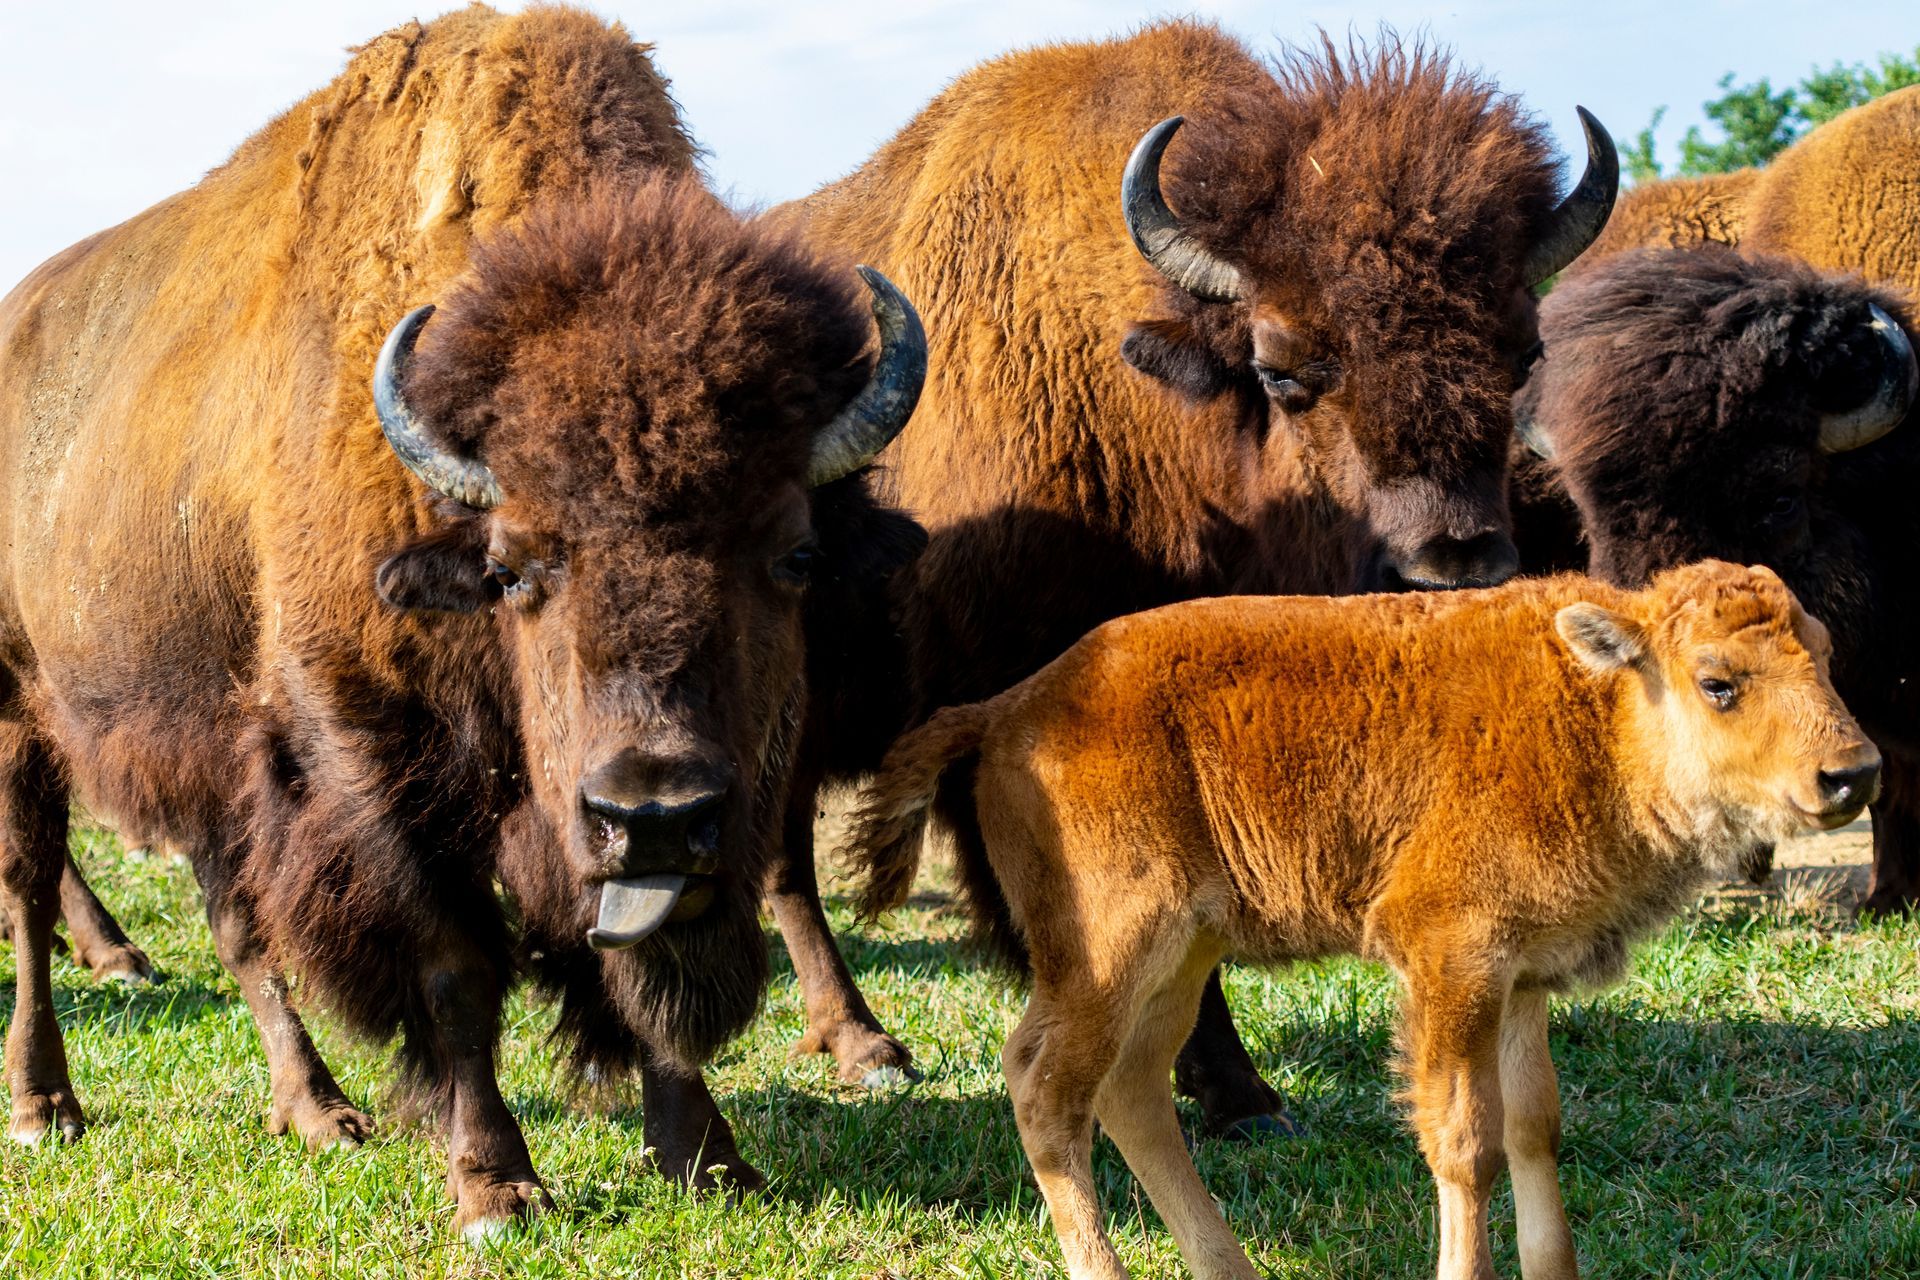 A herd of bison standing next to each other in a grassy field.